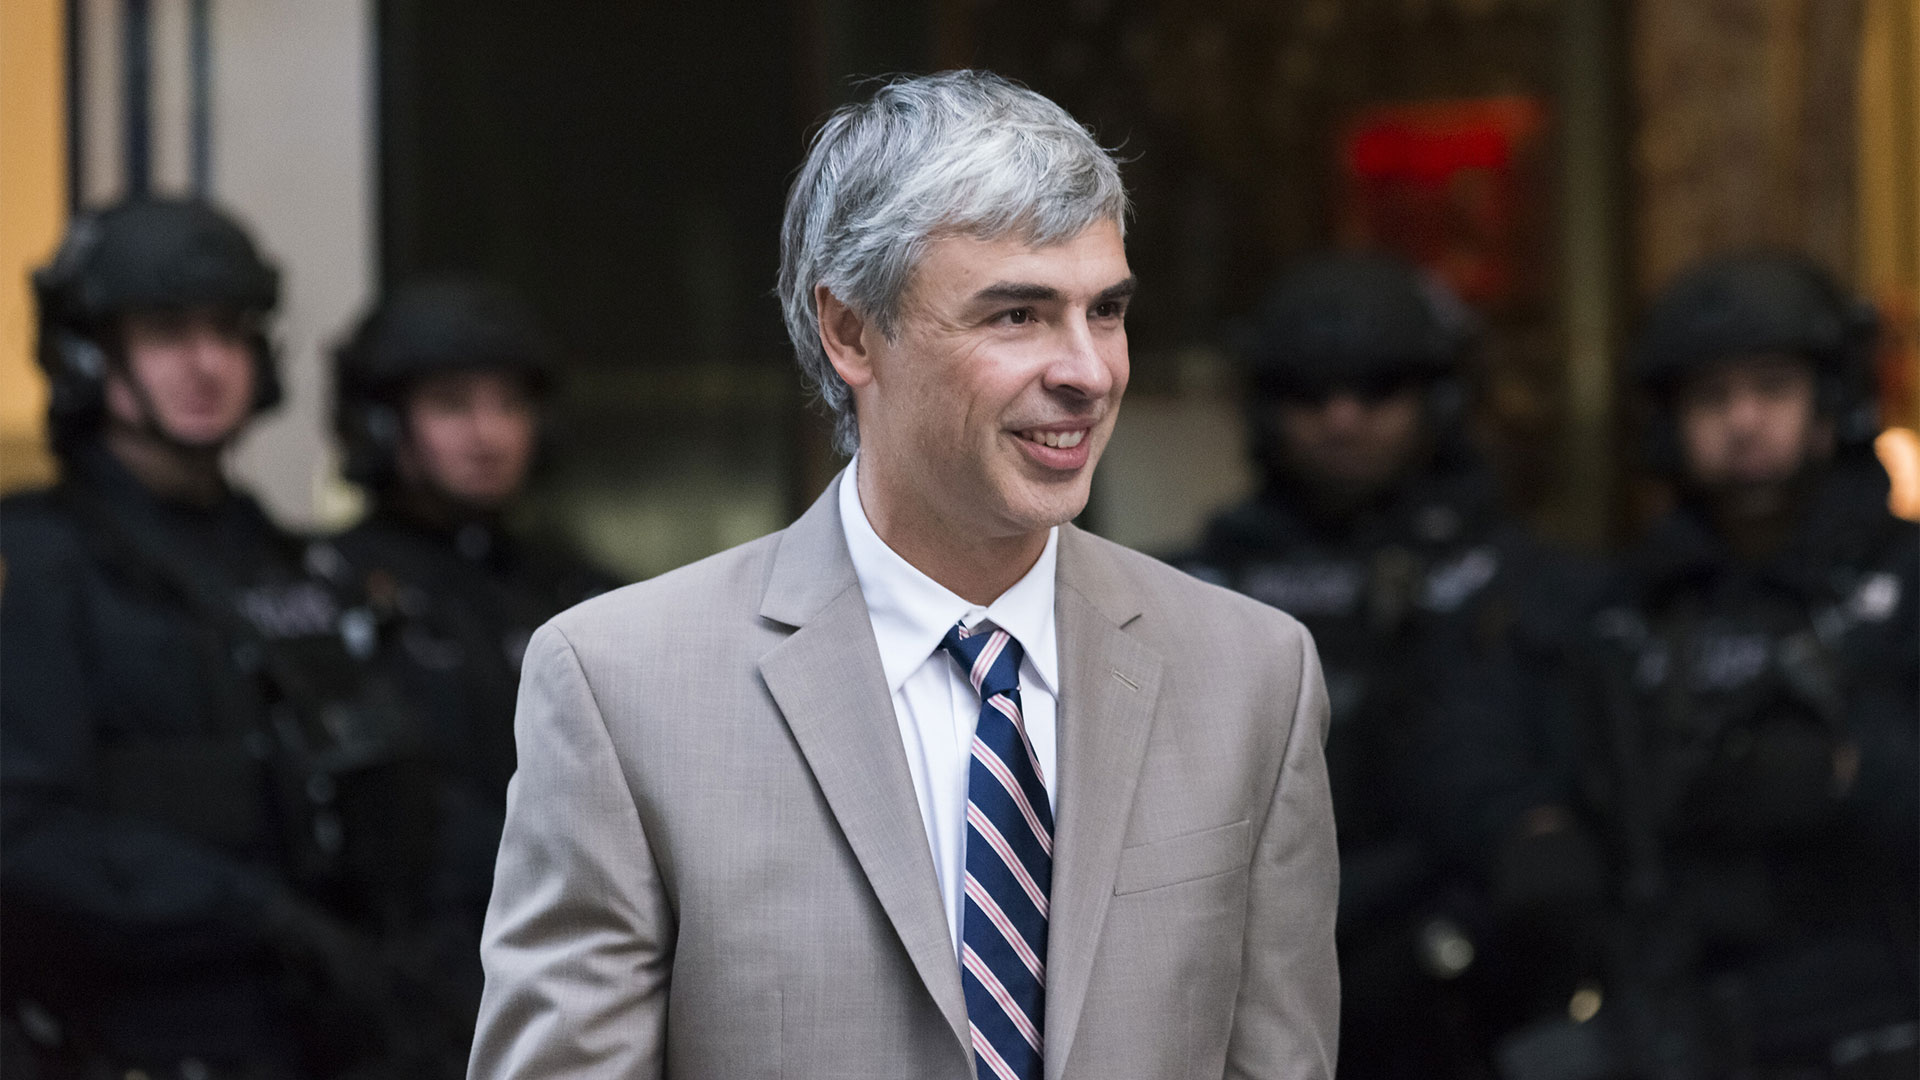 Larry Page | picture alliance / Newscom